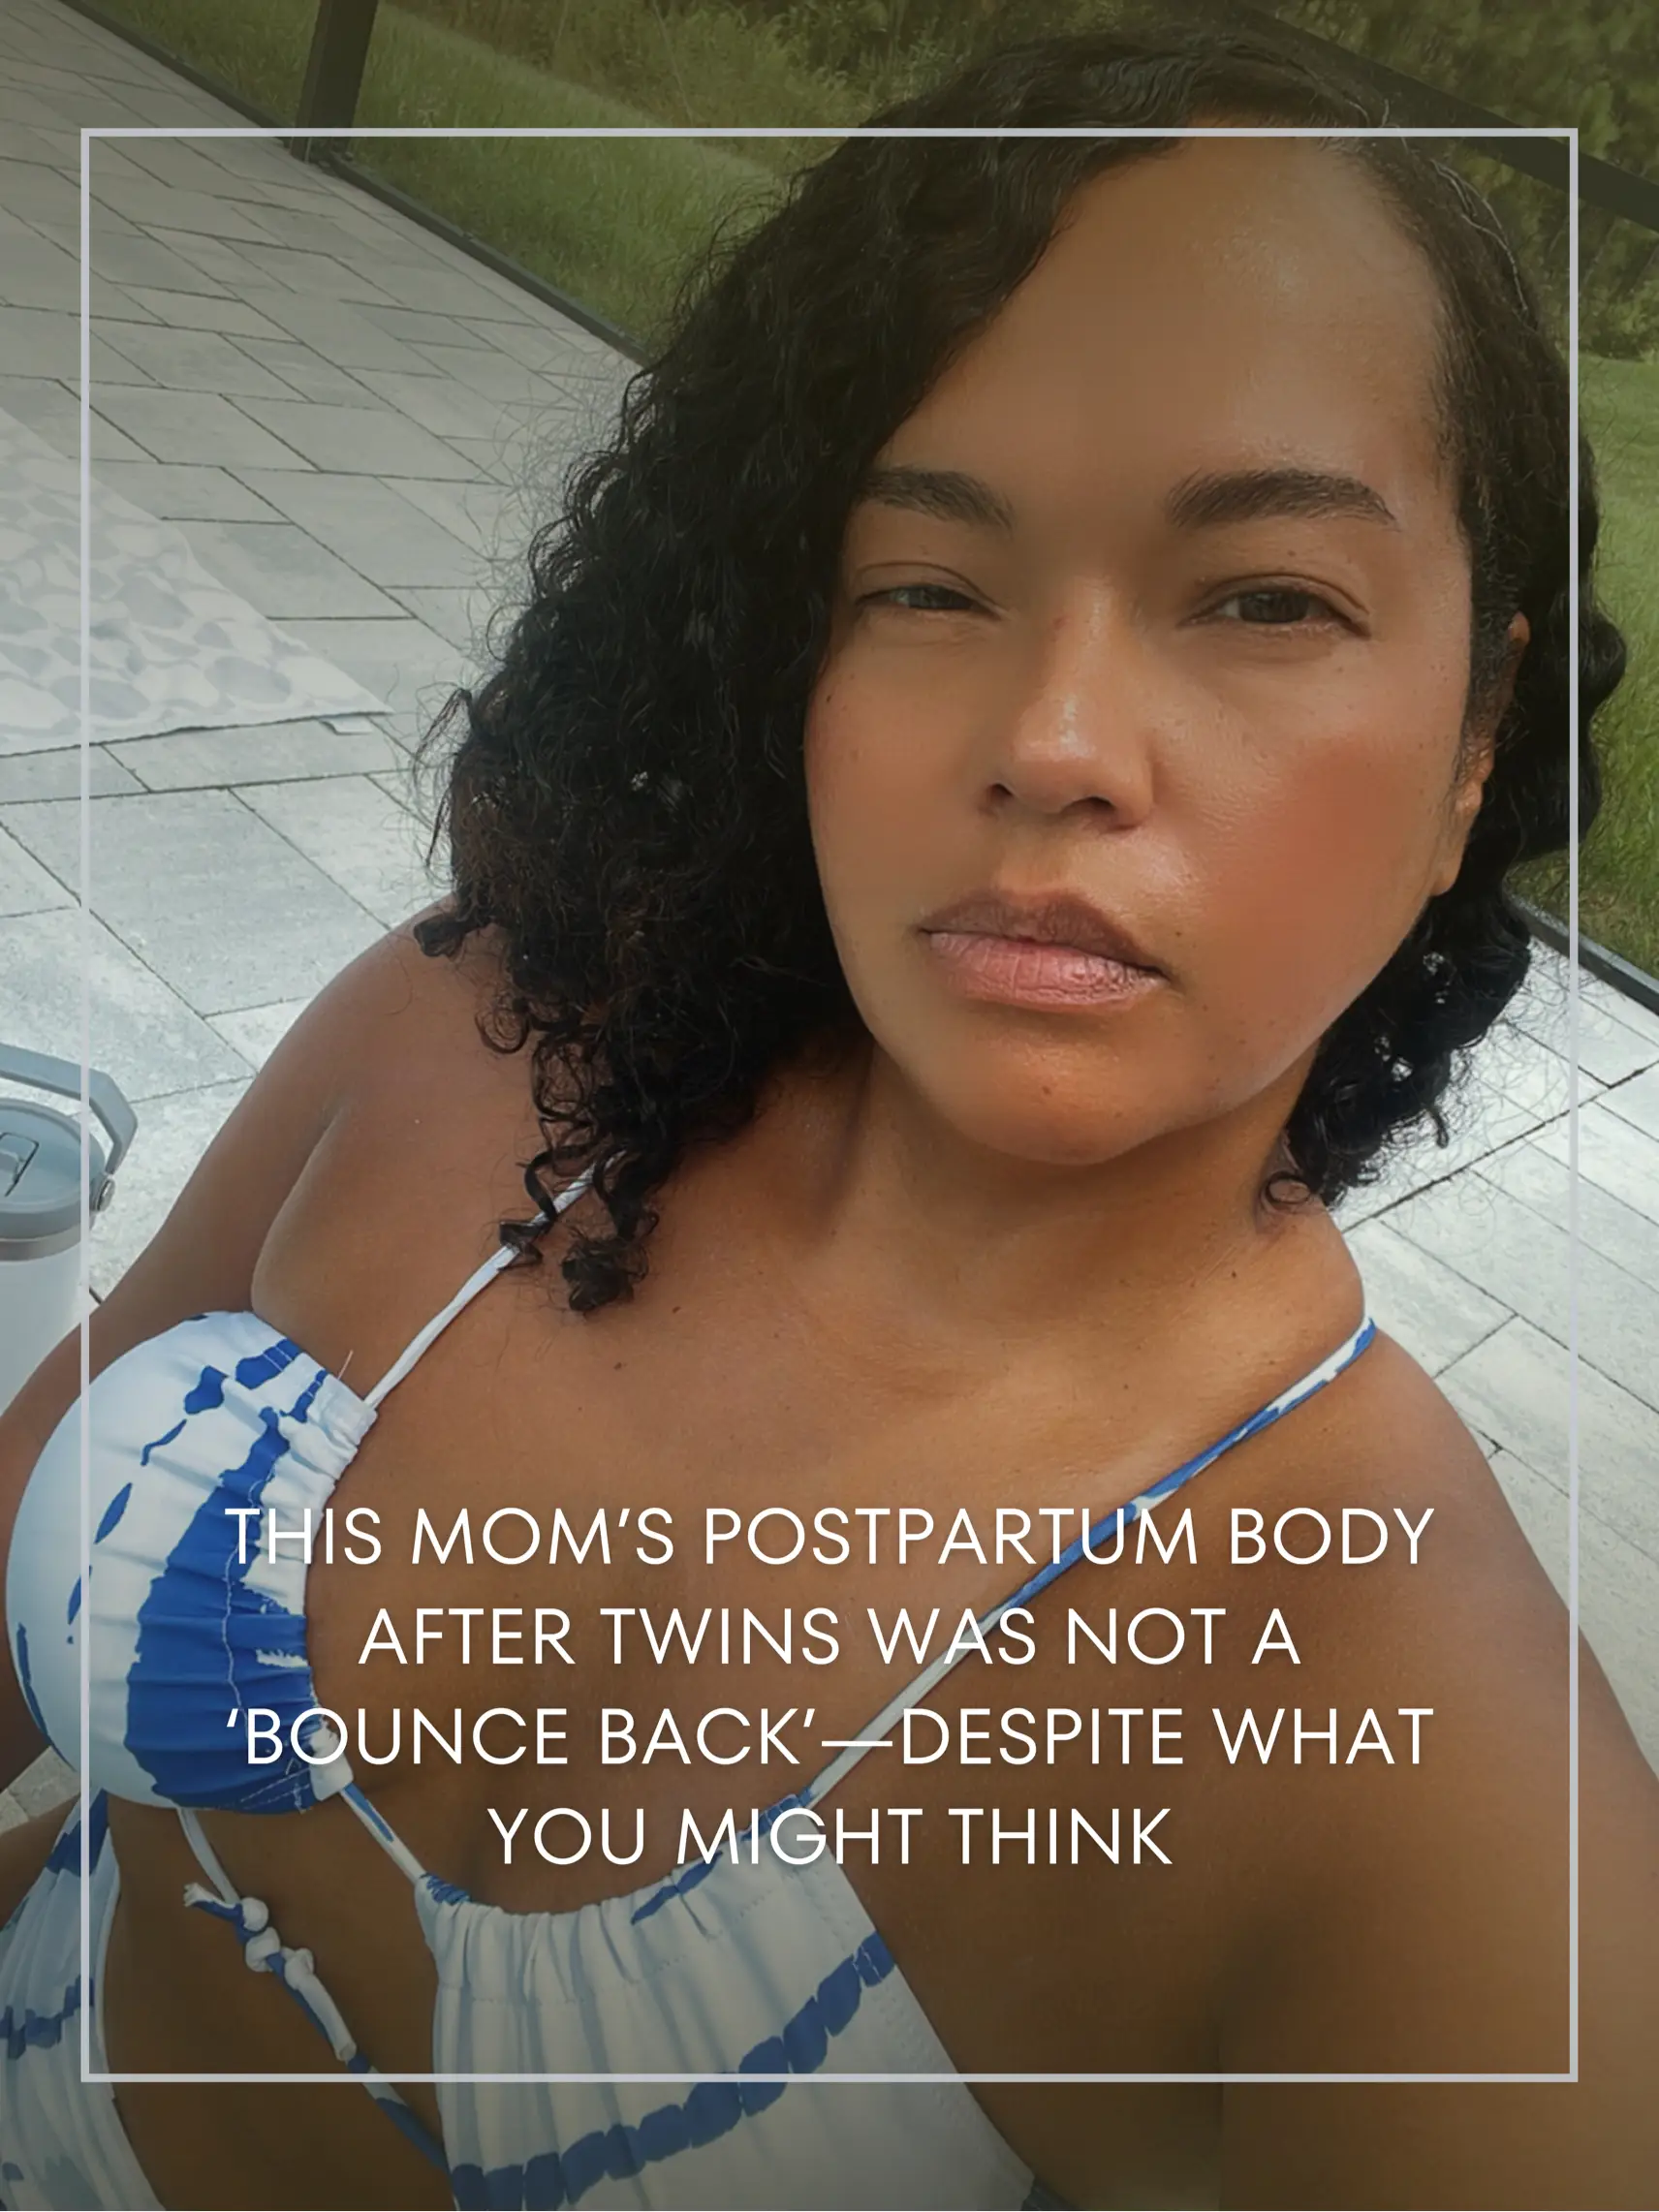 Postpartum bodies: The 'bounce back' isn't real—but fully